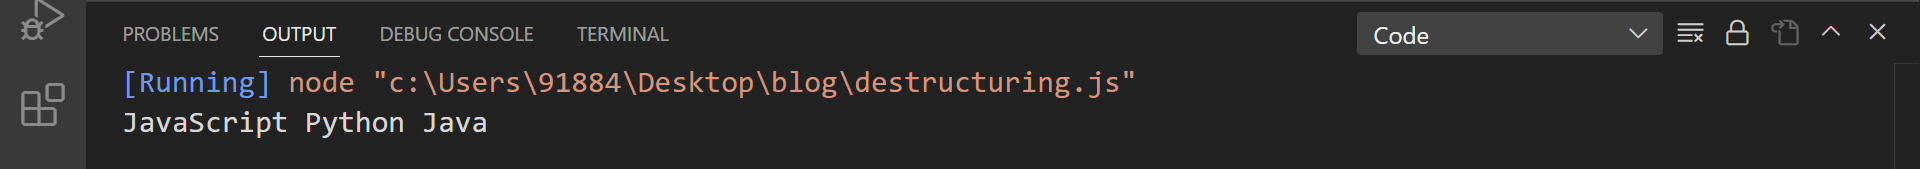 Destructuring_img